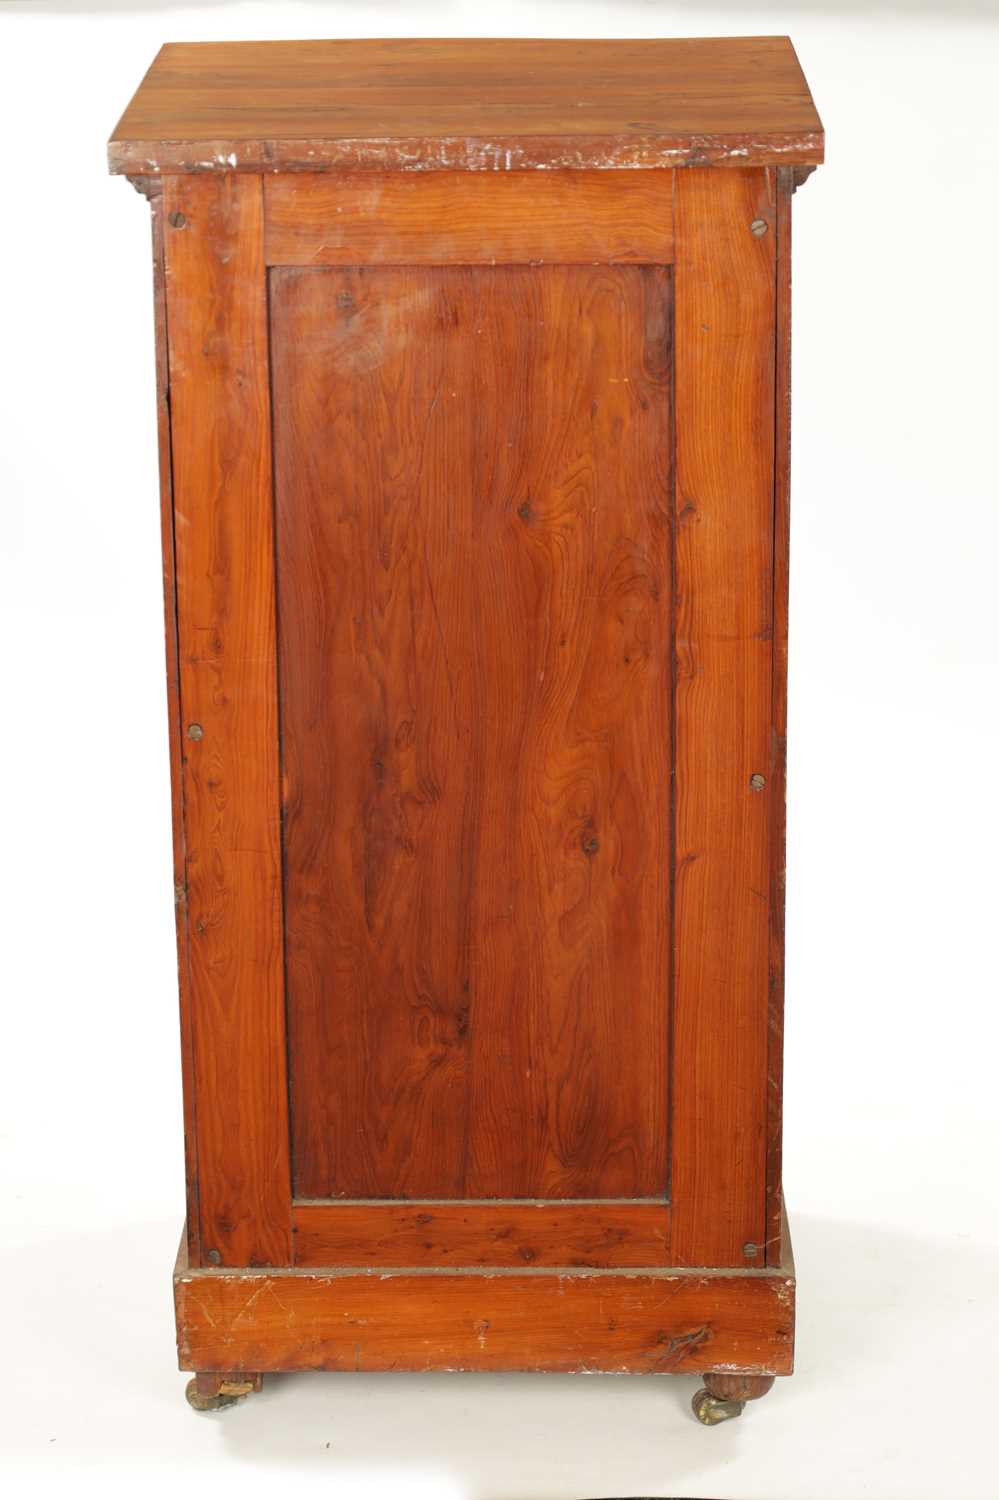 AN 18TH CENTURY EMPIRE STYLE YEW-WOOD BEDSIDE CABINET - Image 7 of 9